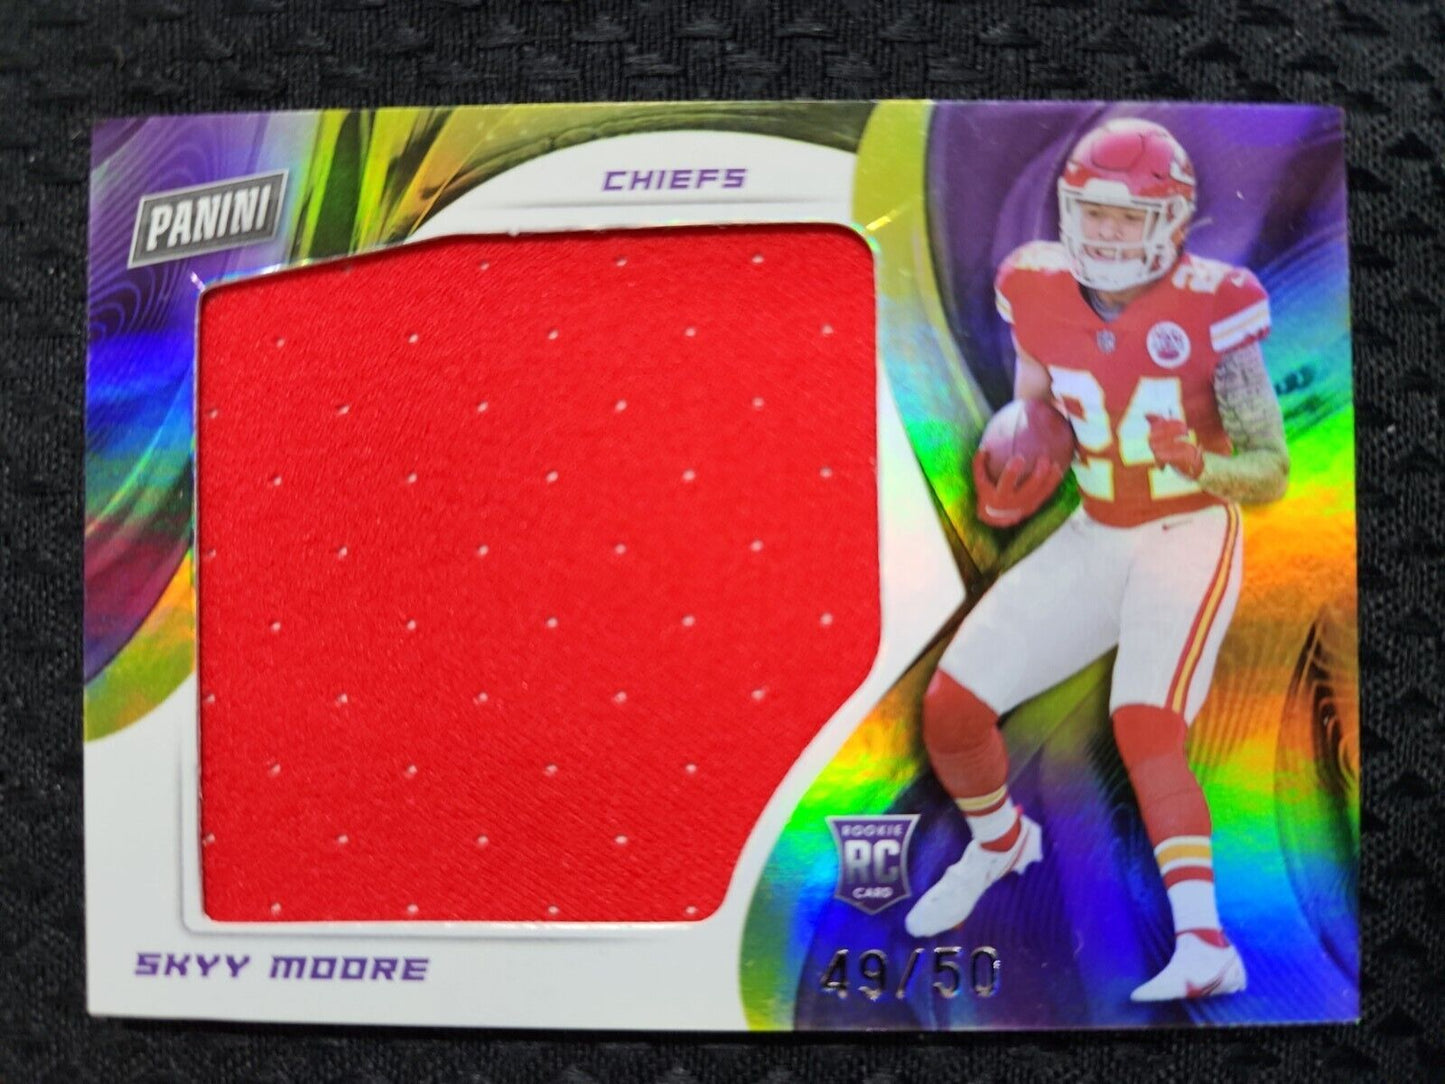 SKYY MOORE 2022 PANINI PLAYER OF THE DAY JUMBO JERSEY /50 RC CHIEFS ROOKIE